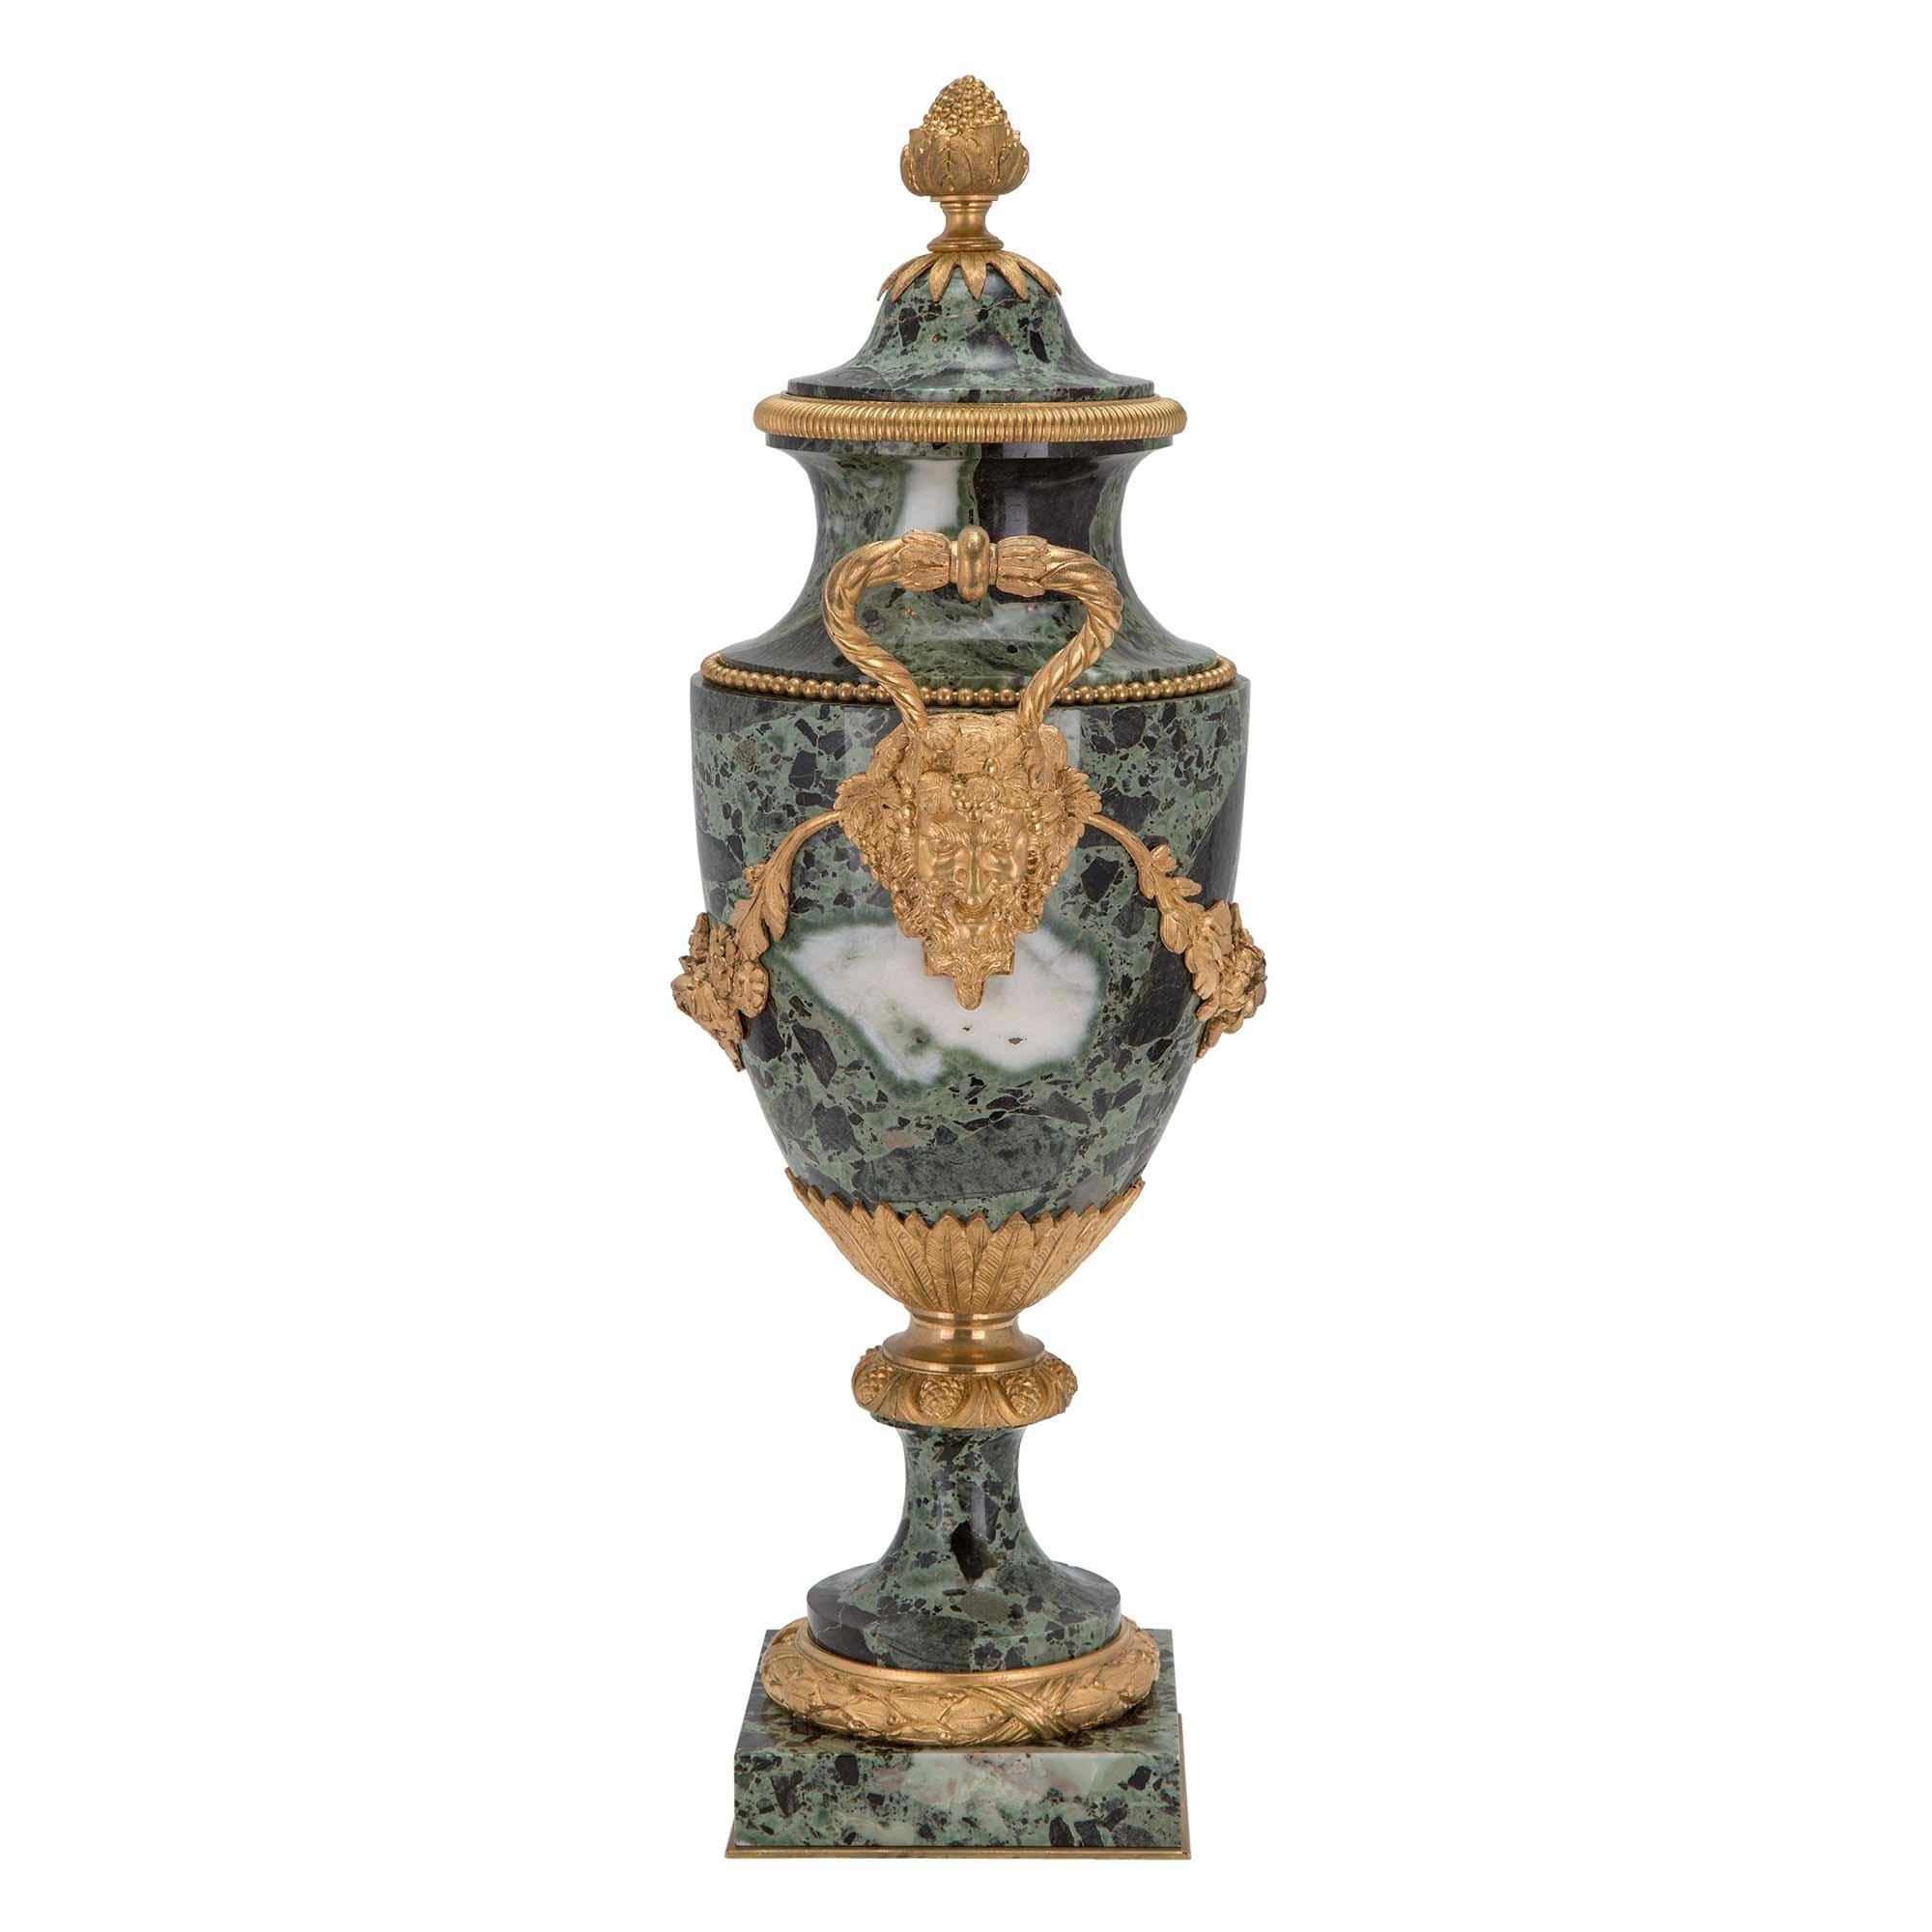 A superb pair of French 19th century Louis XVI st. Bréche Verte marble and ormolu urns. Each is raised on a square marble base with ormolu trim and ormolu laurel wreath above. The body is raised on a marble socle and is decorated by large ormolu